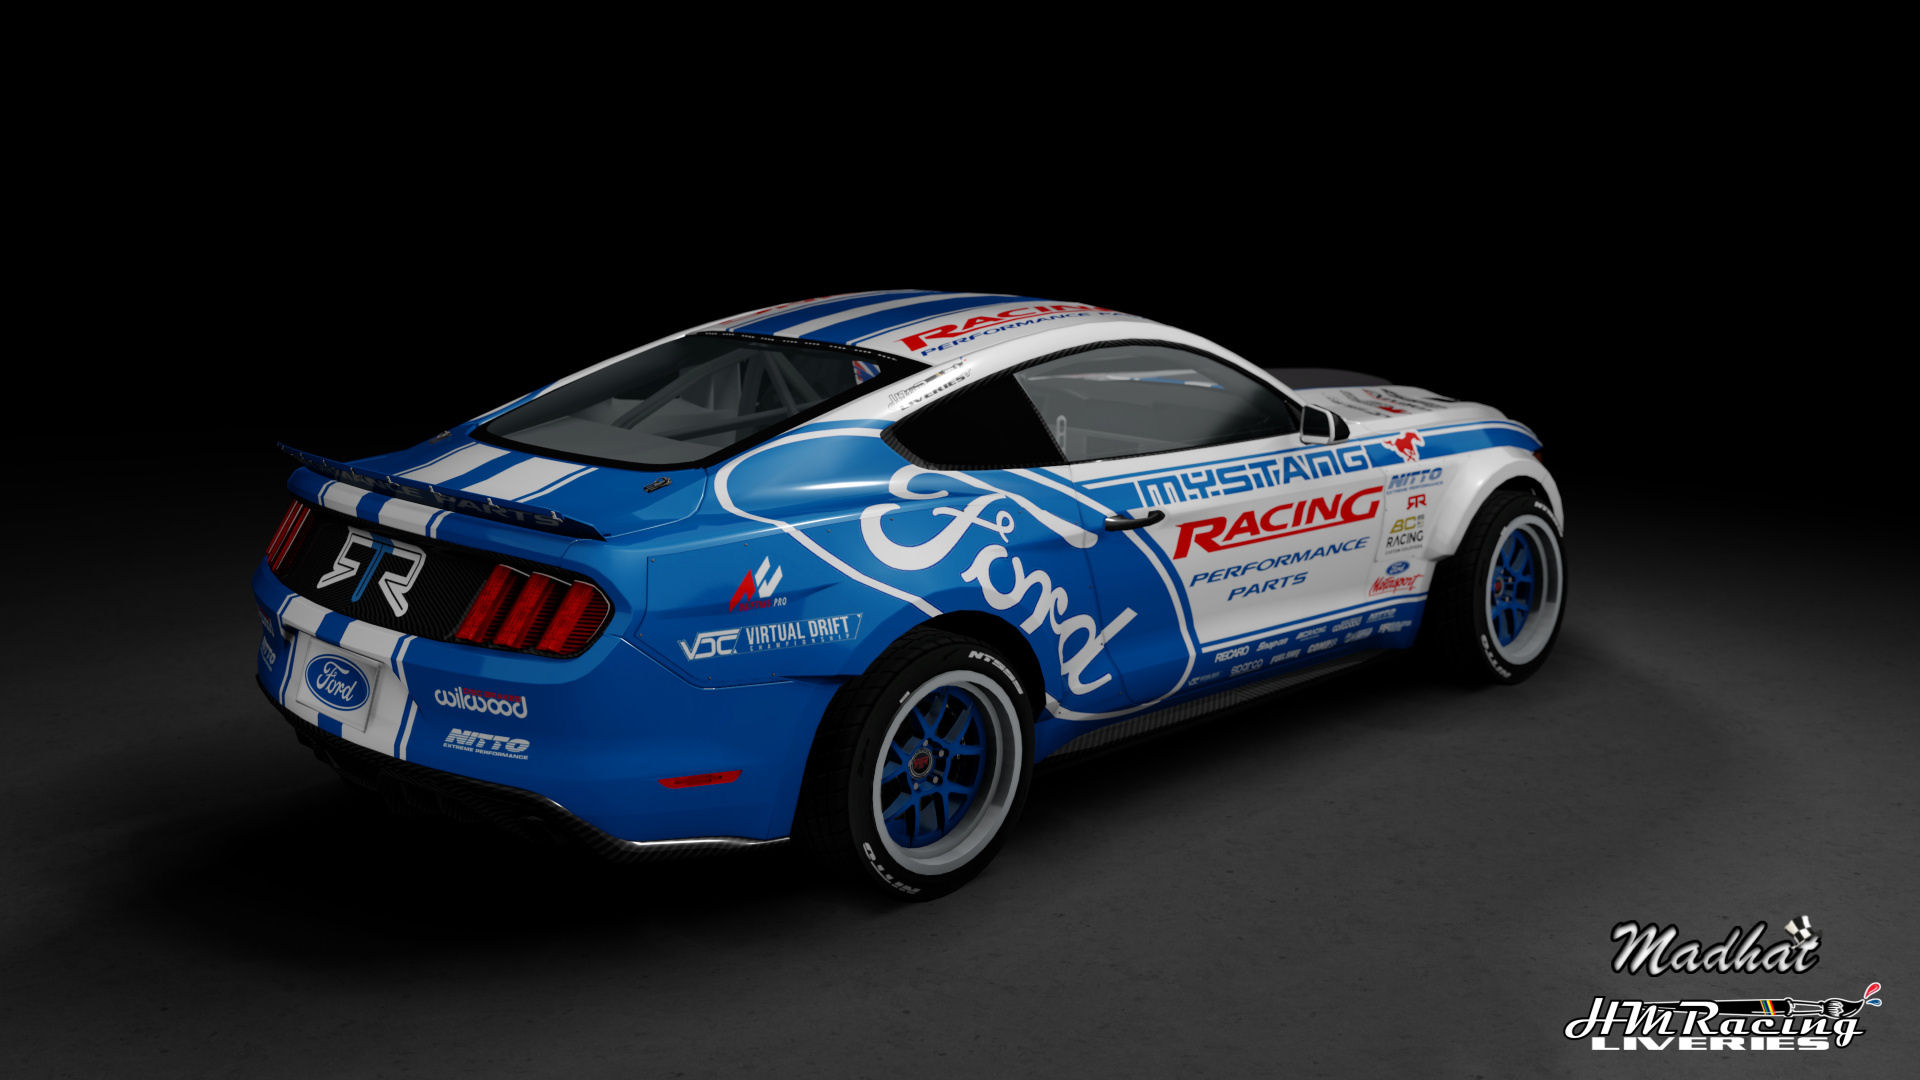 Ford Racing Performance Parts VDC RTR Mustang Madhat HMRacing Liveries 04.jpg